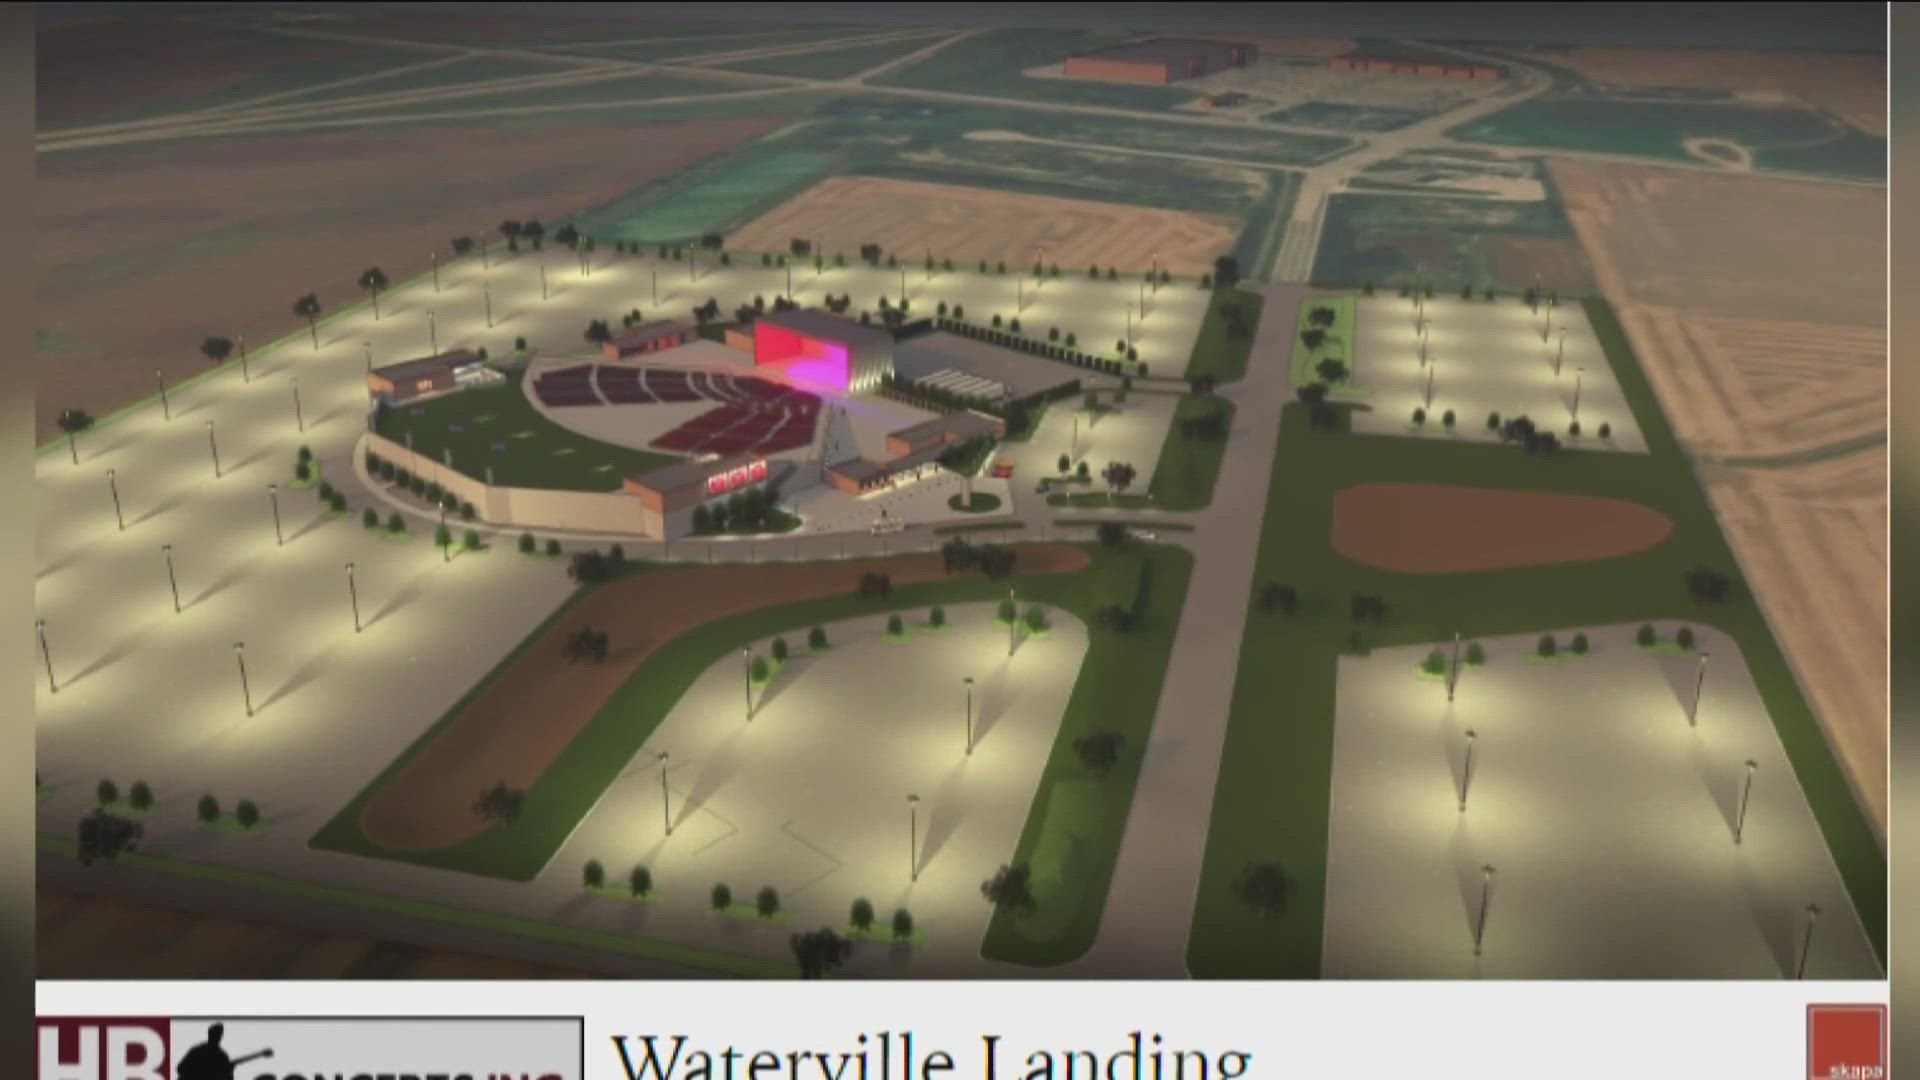 Lucas County Common Pleas Judge Lindsay Navarre ruled in favor of the project, but developer Hunter Brucks has long moved on from the Waterville project.